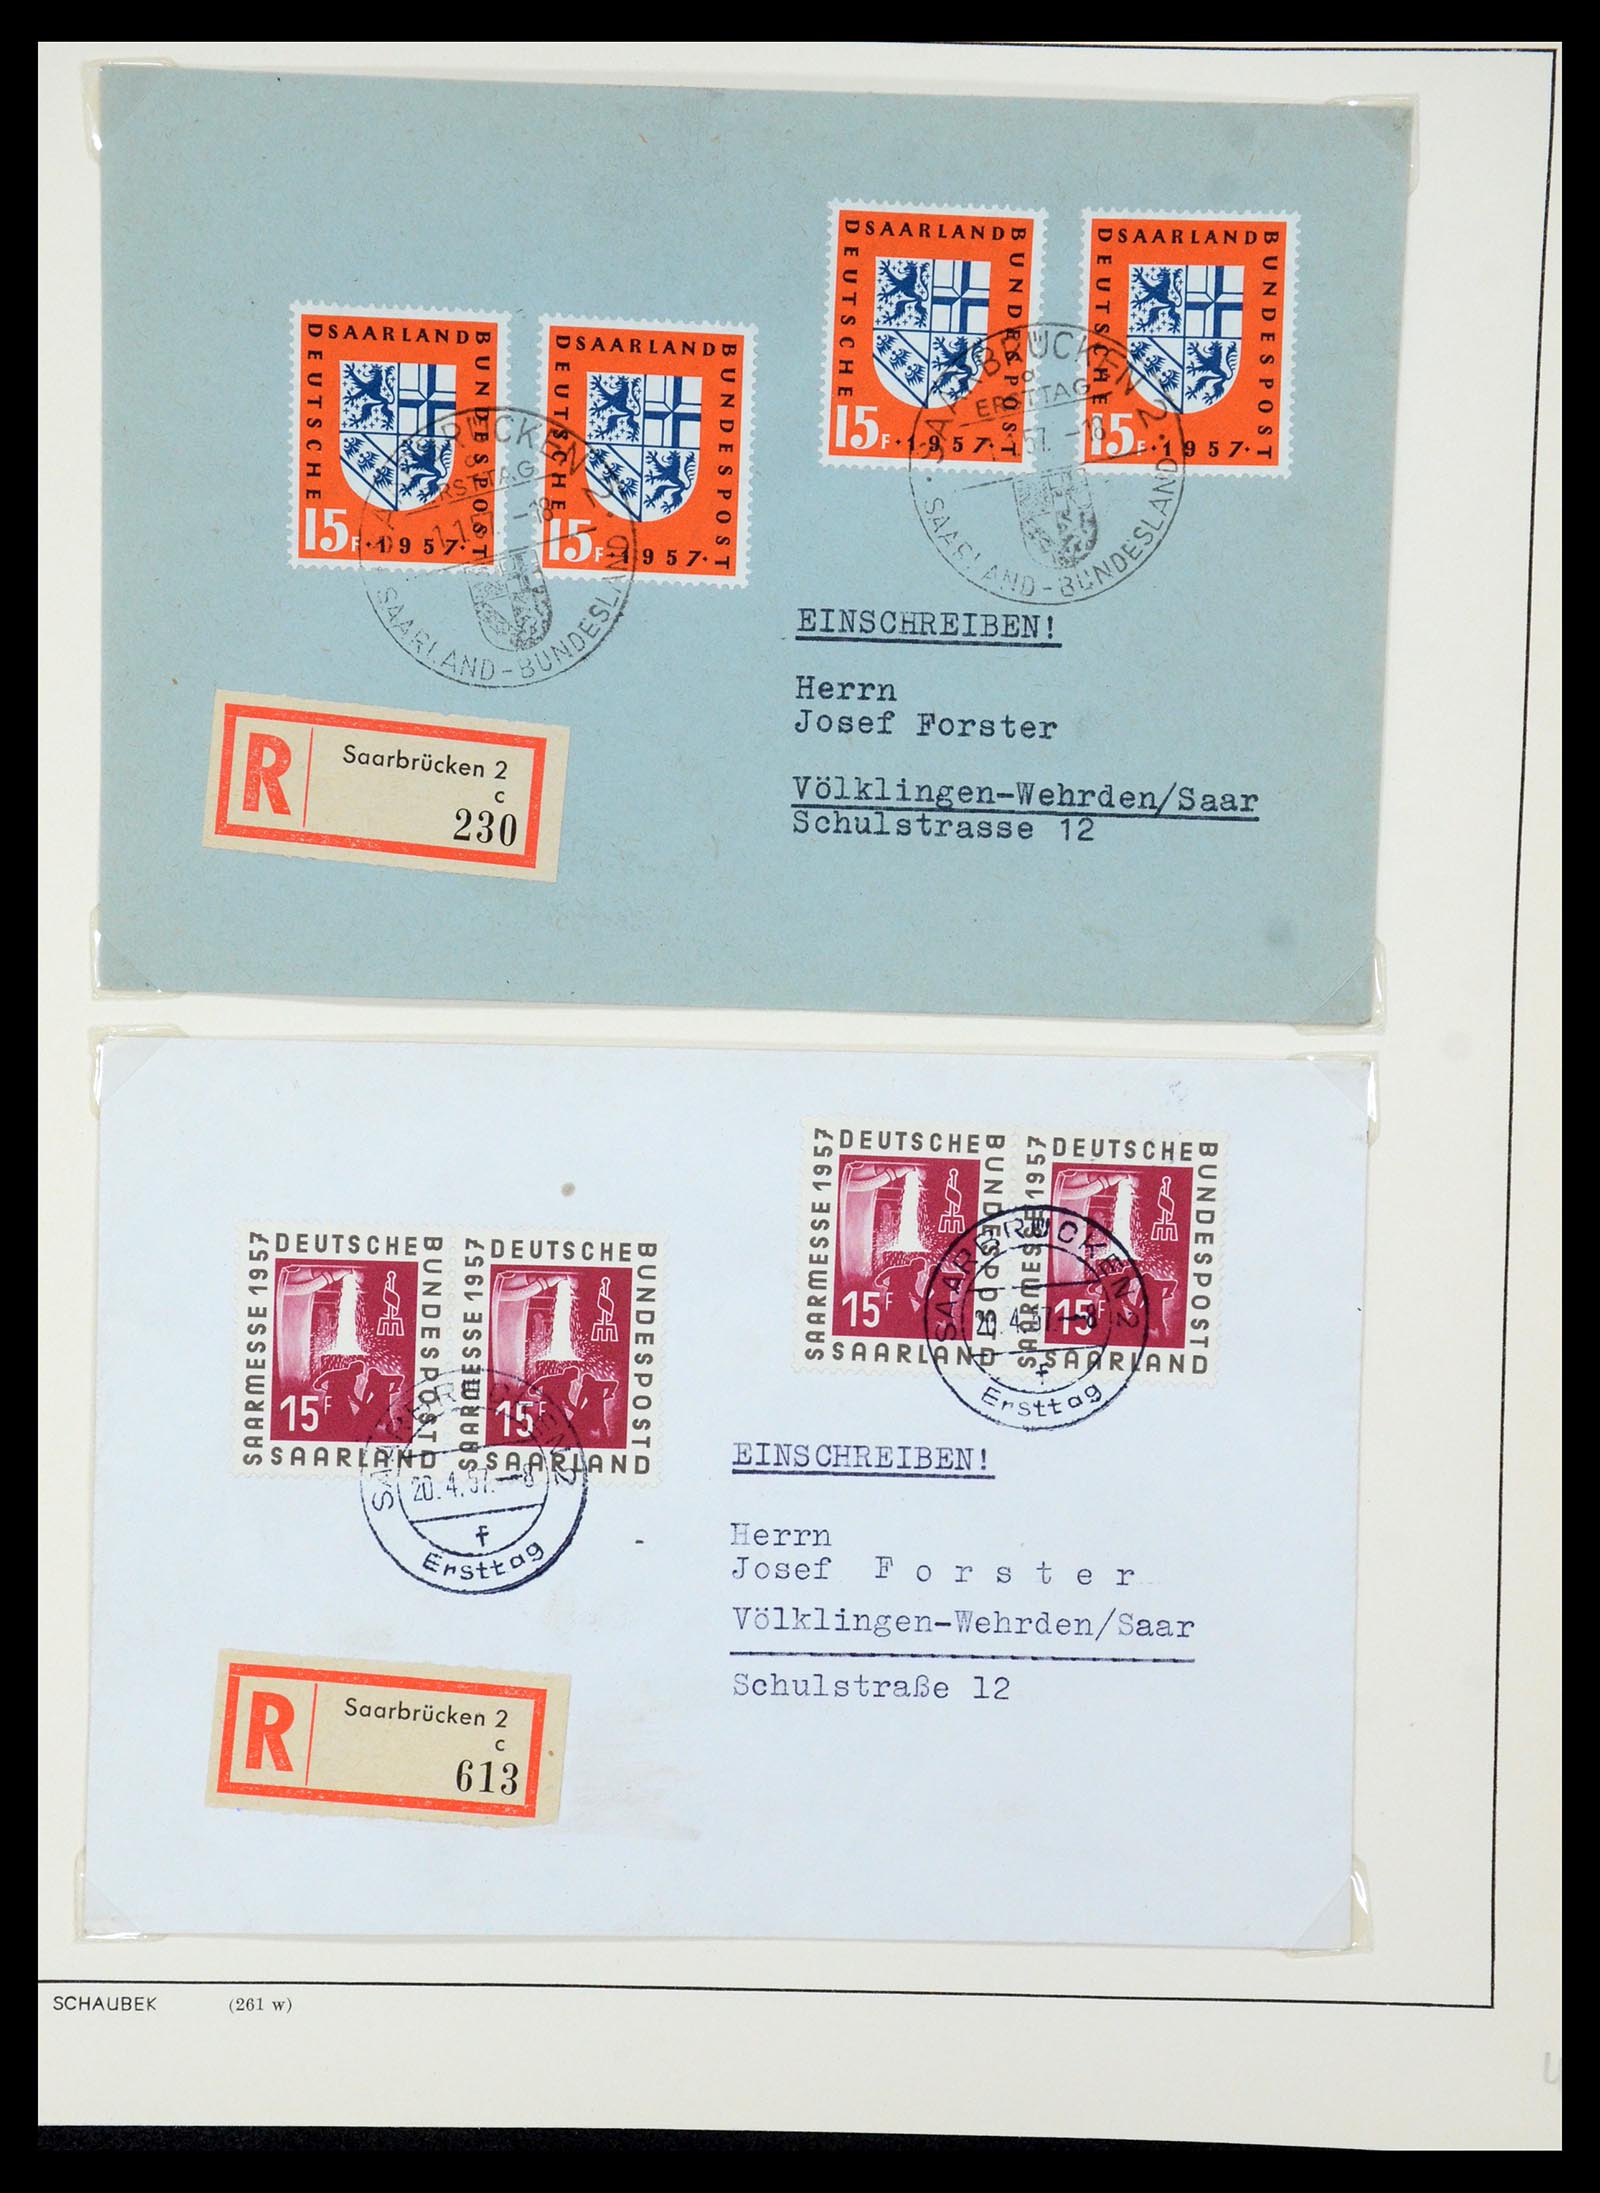 35483 093 - Stamp Collection 35483 Saar covers and FDC's 1948-1959.